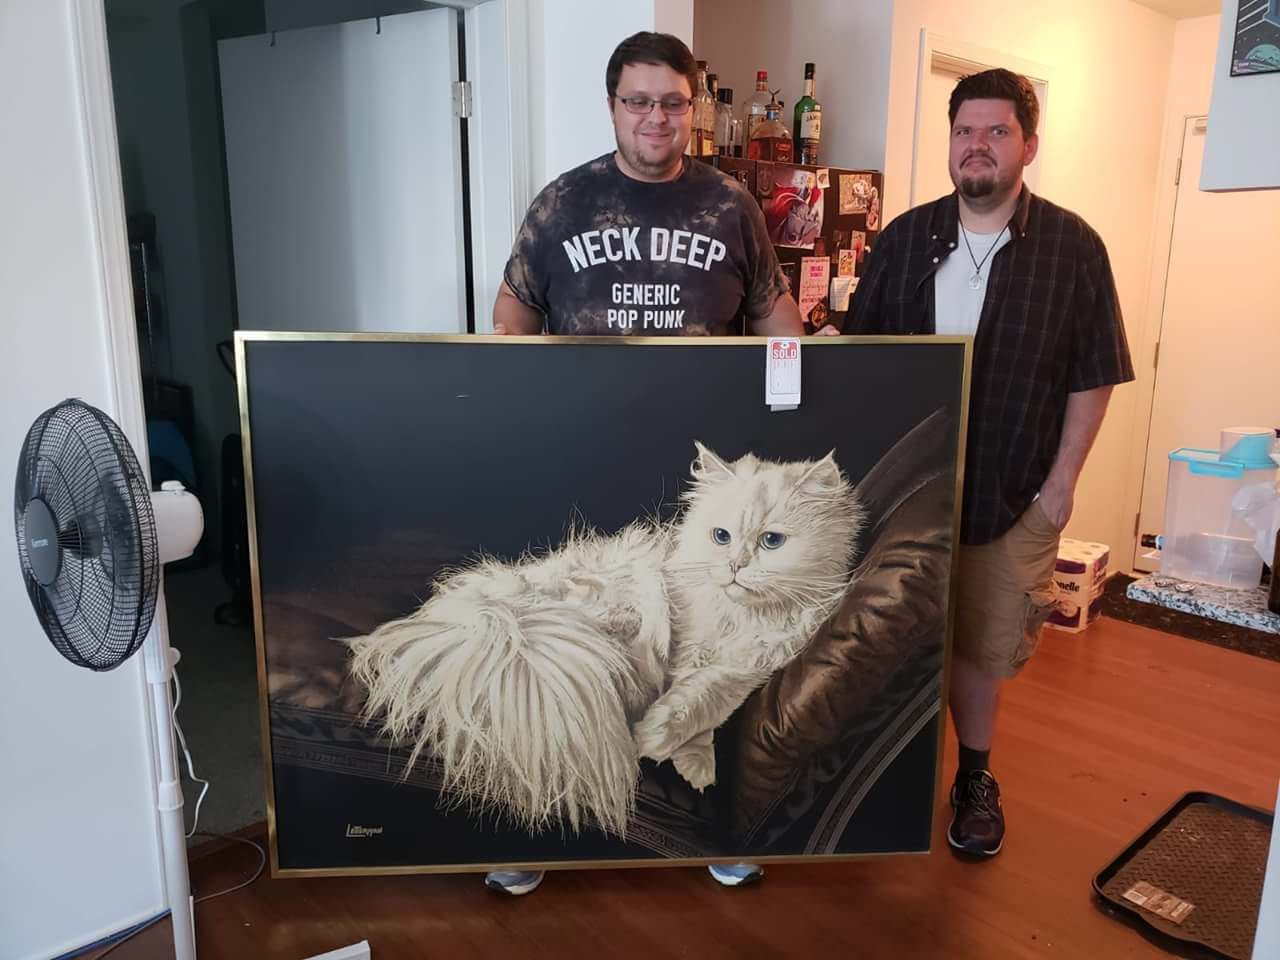 My friend bought this painting at a thrift store.